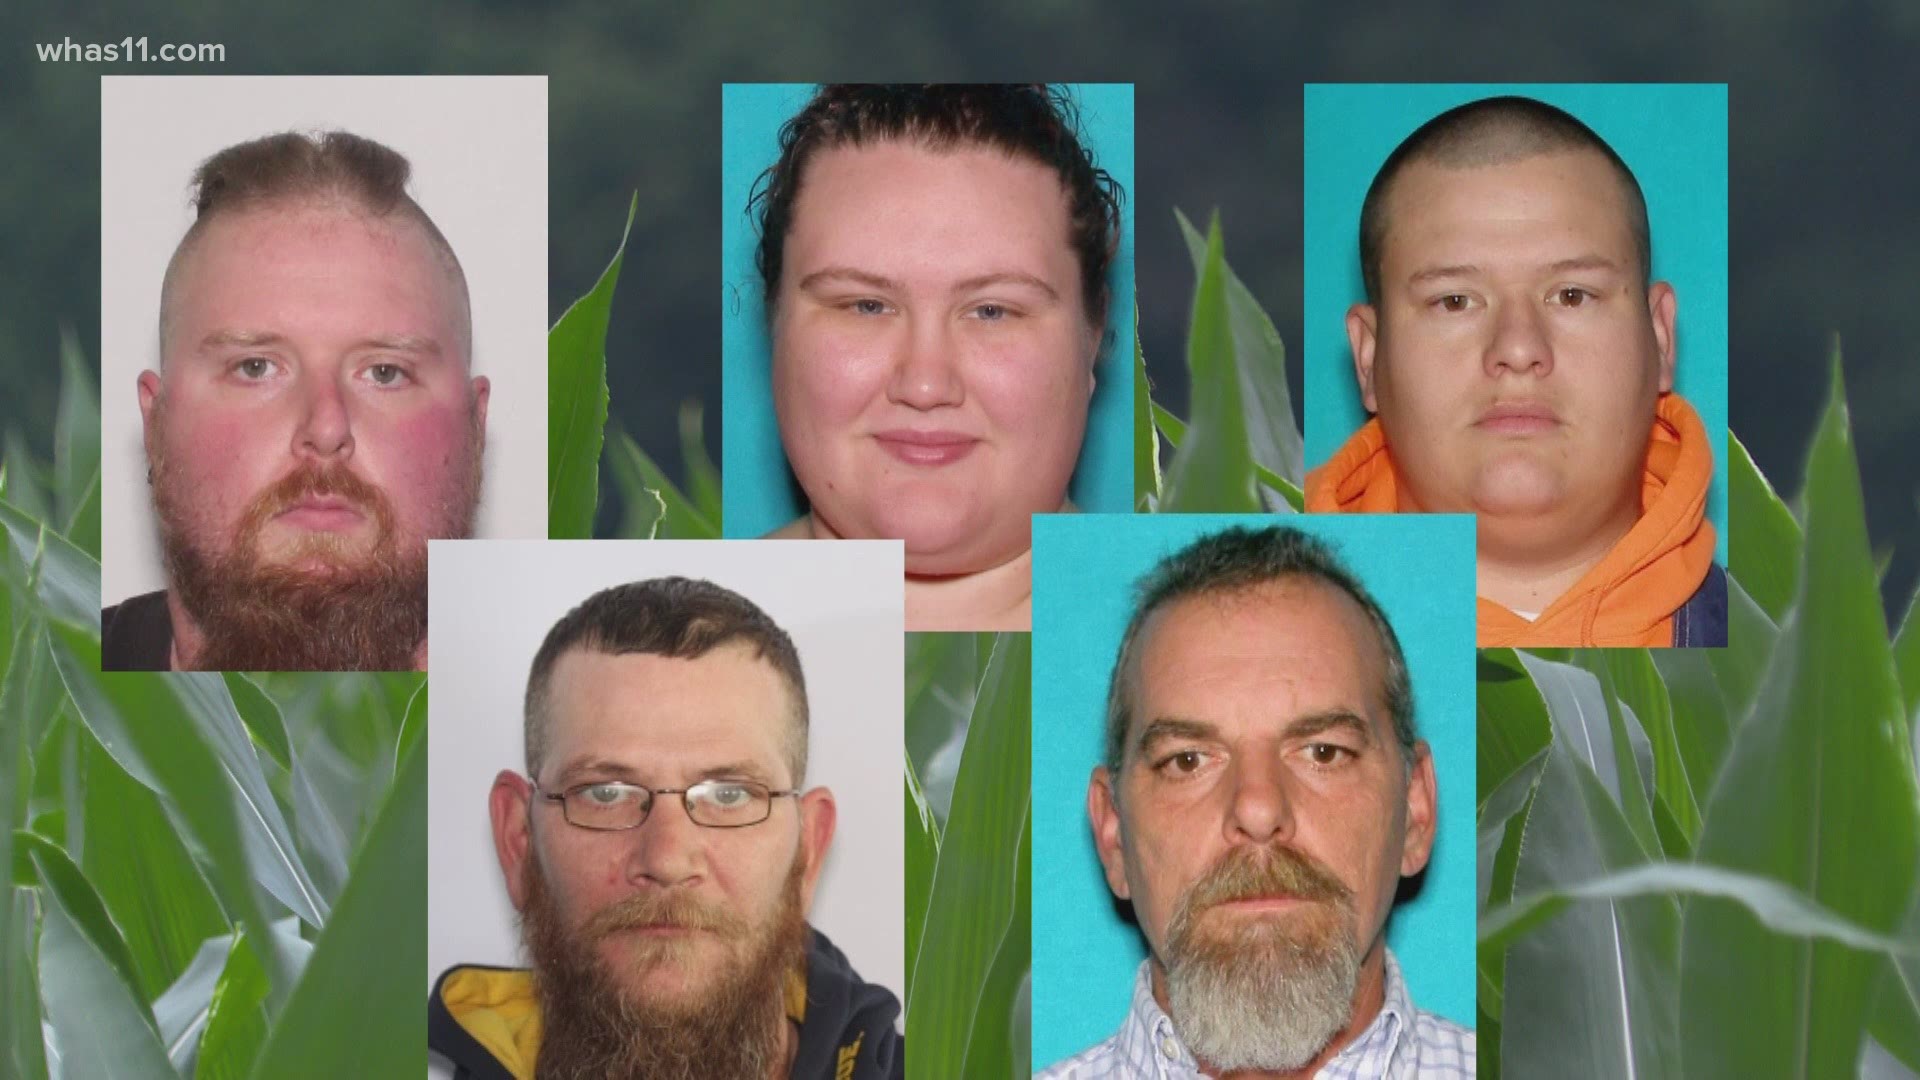 Tattoos and patches tied to a motorcycle club were the motive behind a deadly attack in southern Indiana, according to the Jefferson County prosecutor.